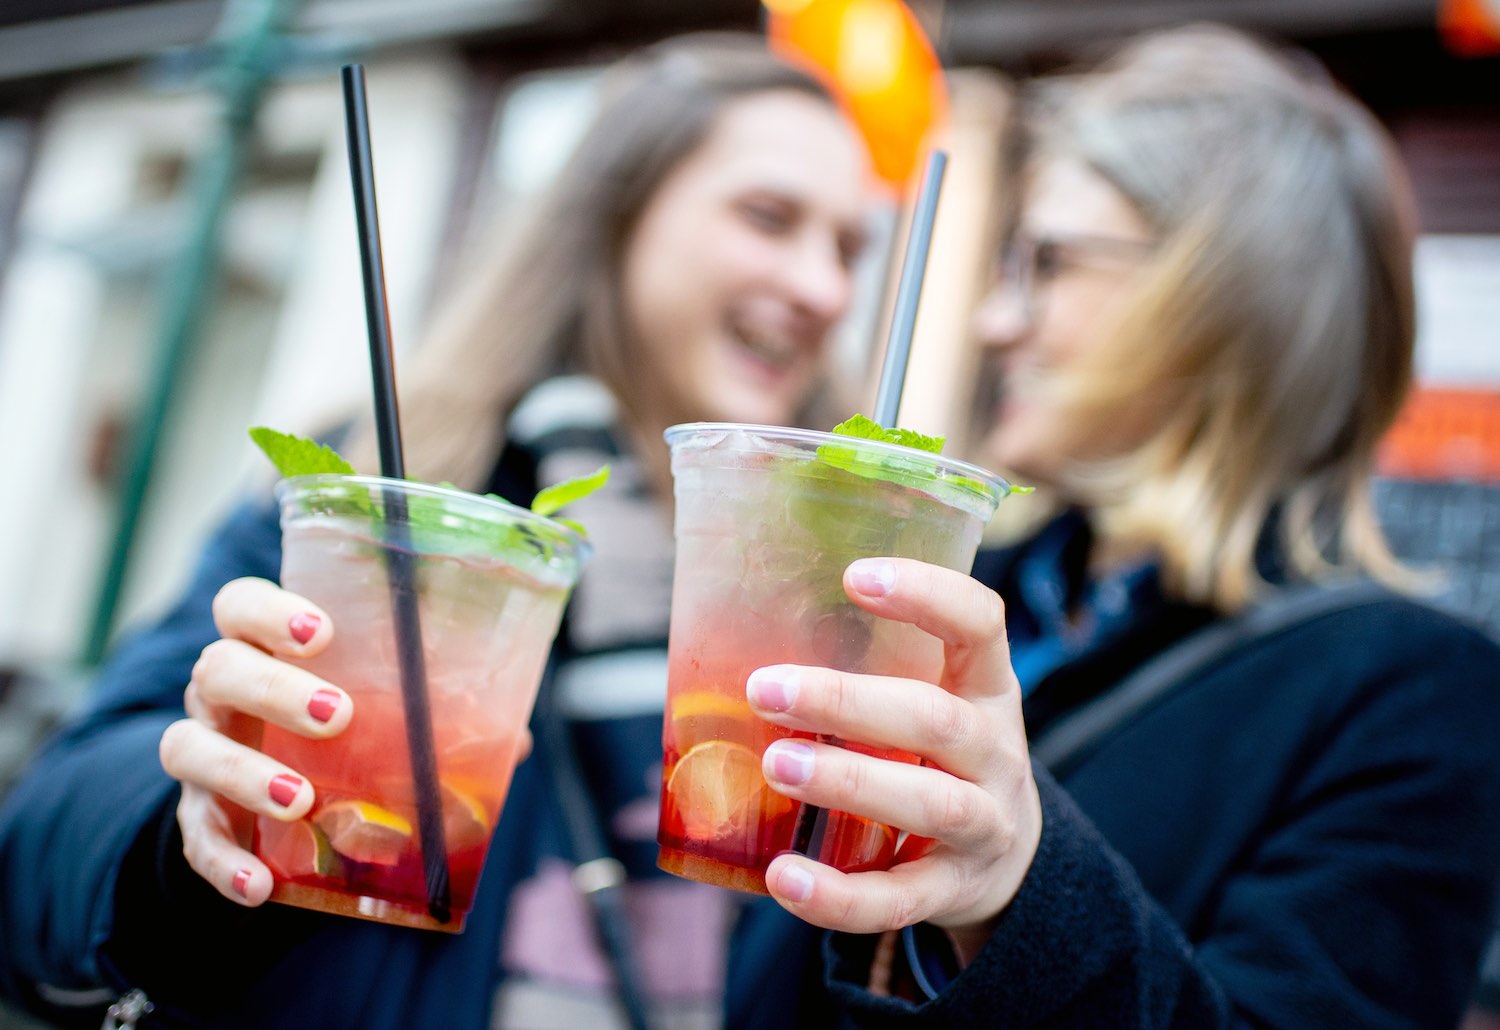 Two women toast with alcoholic cocktails to go.